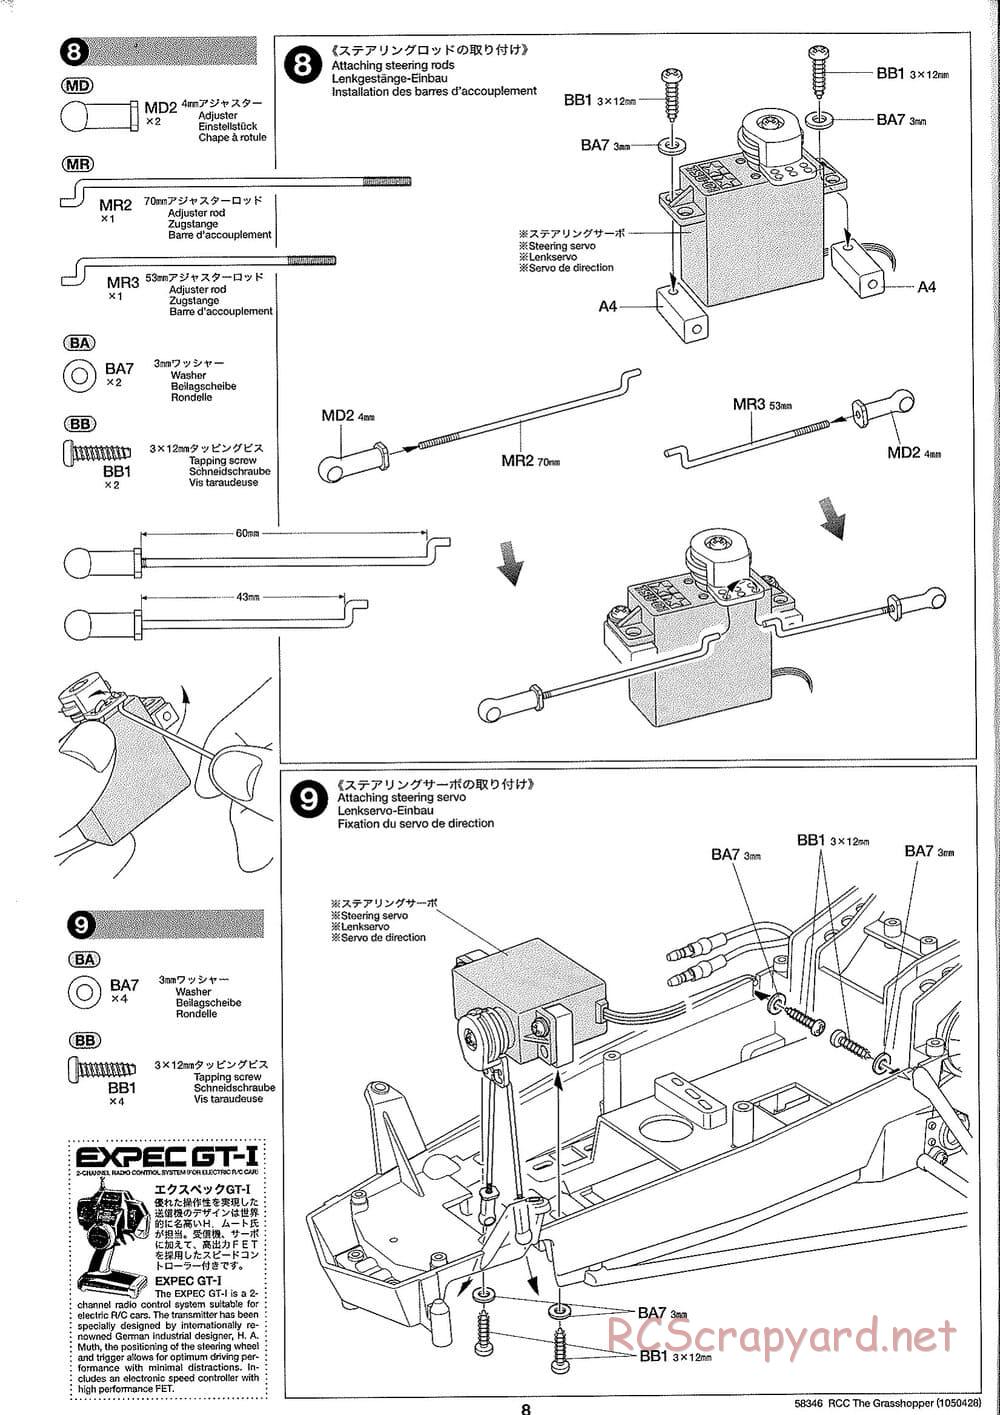 Tamiya - The Grasshopper (2005) - GH Chassis - Manual - Page 8